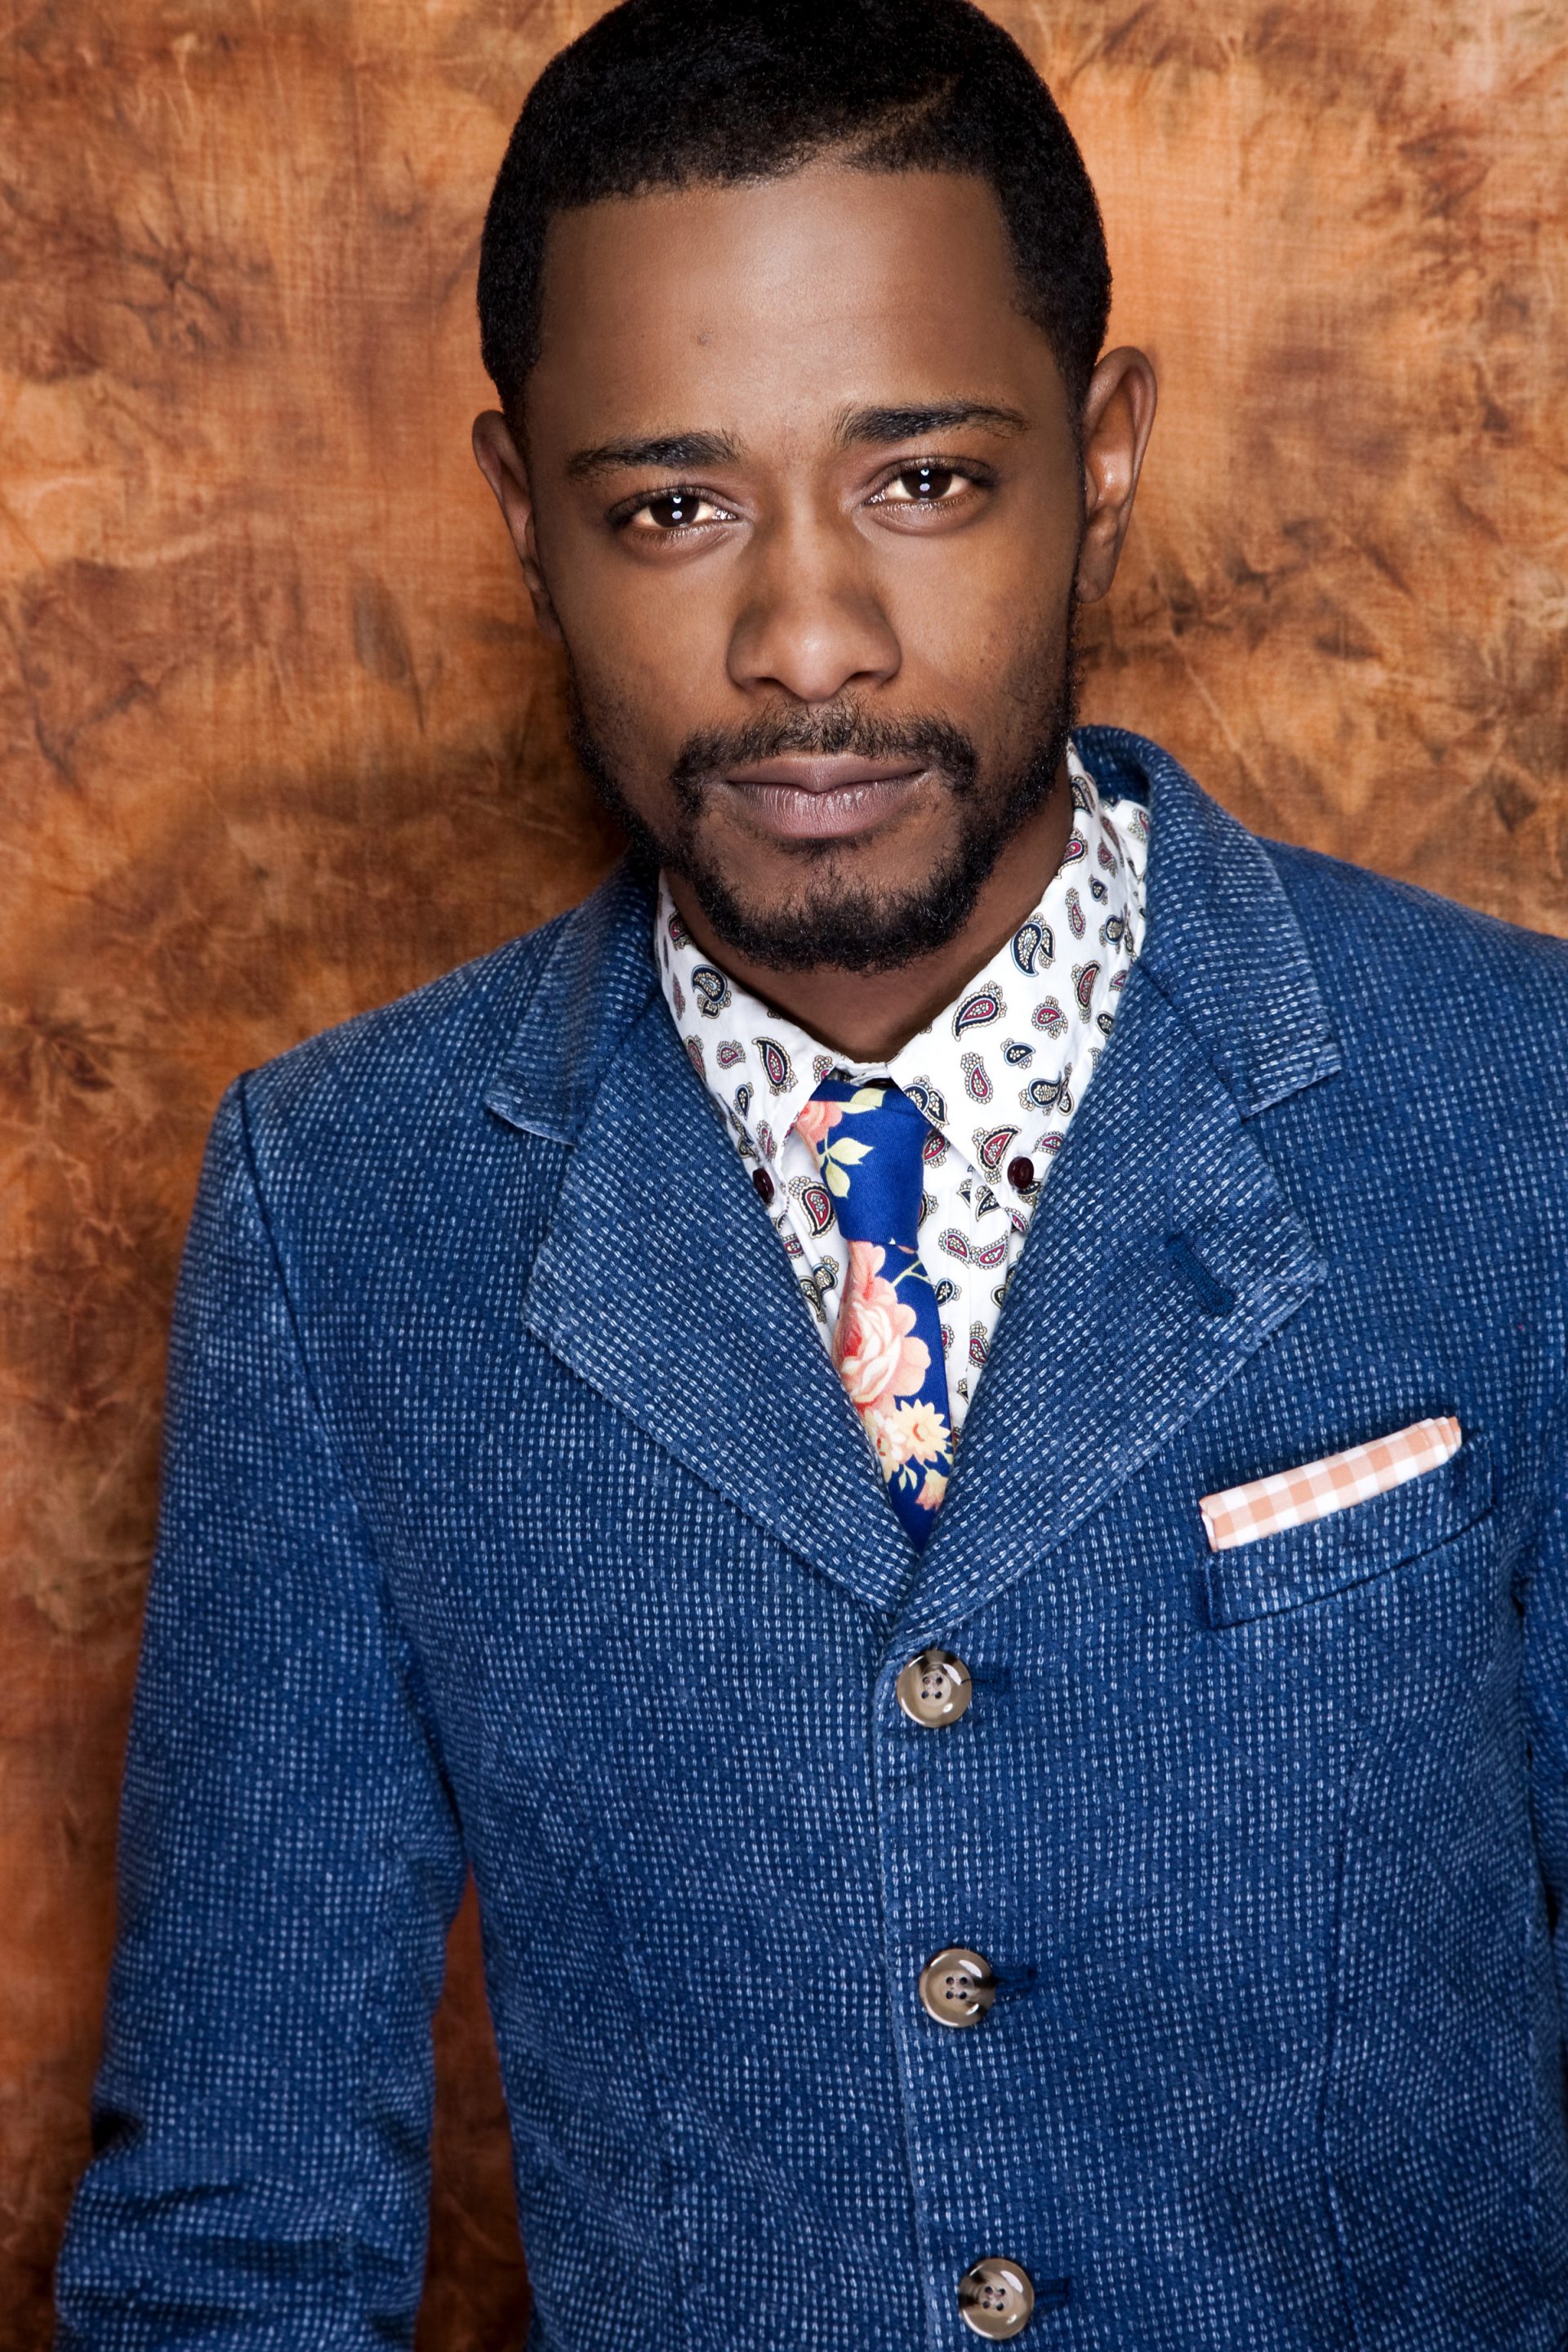 Lakeith Lee Stanfield